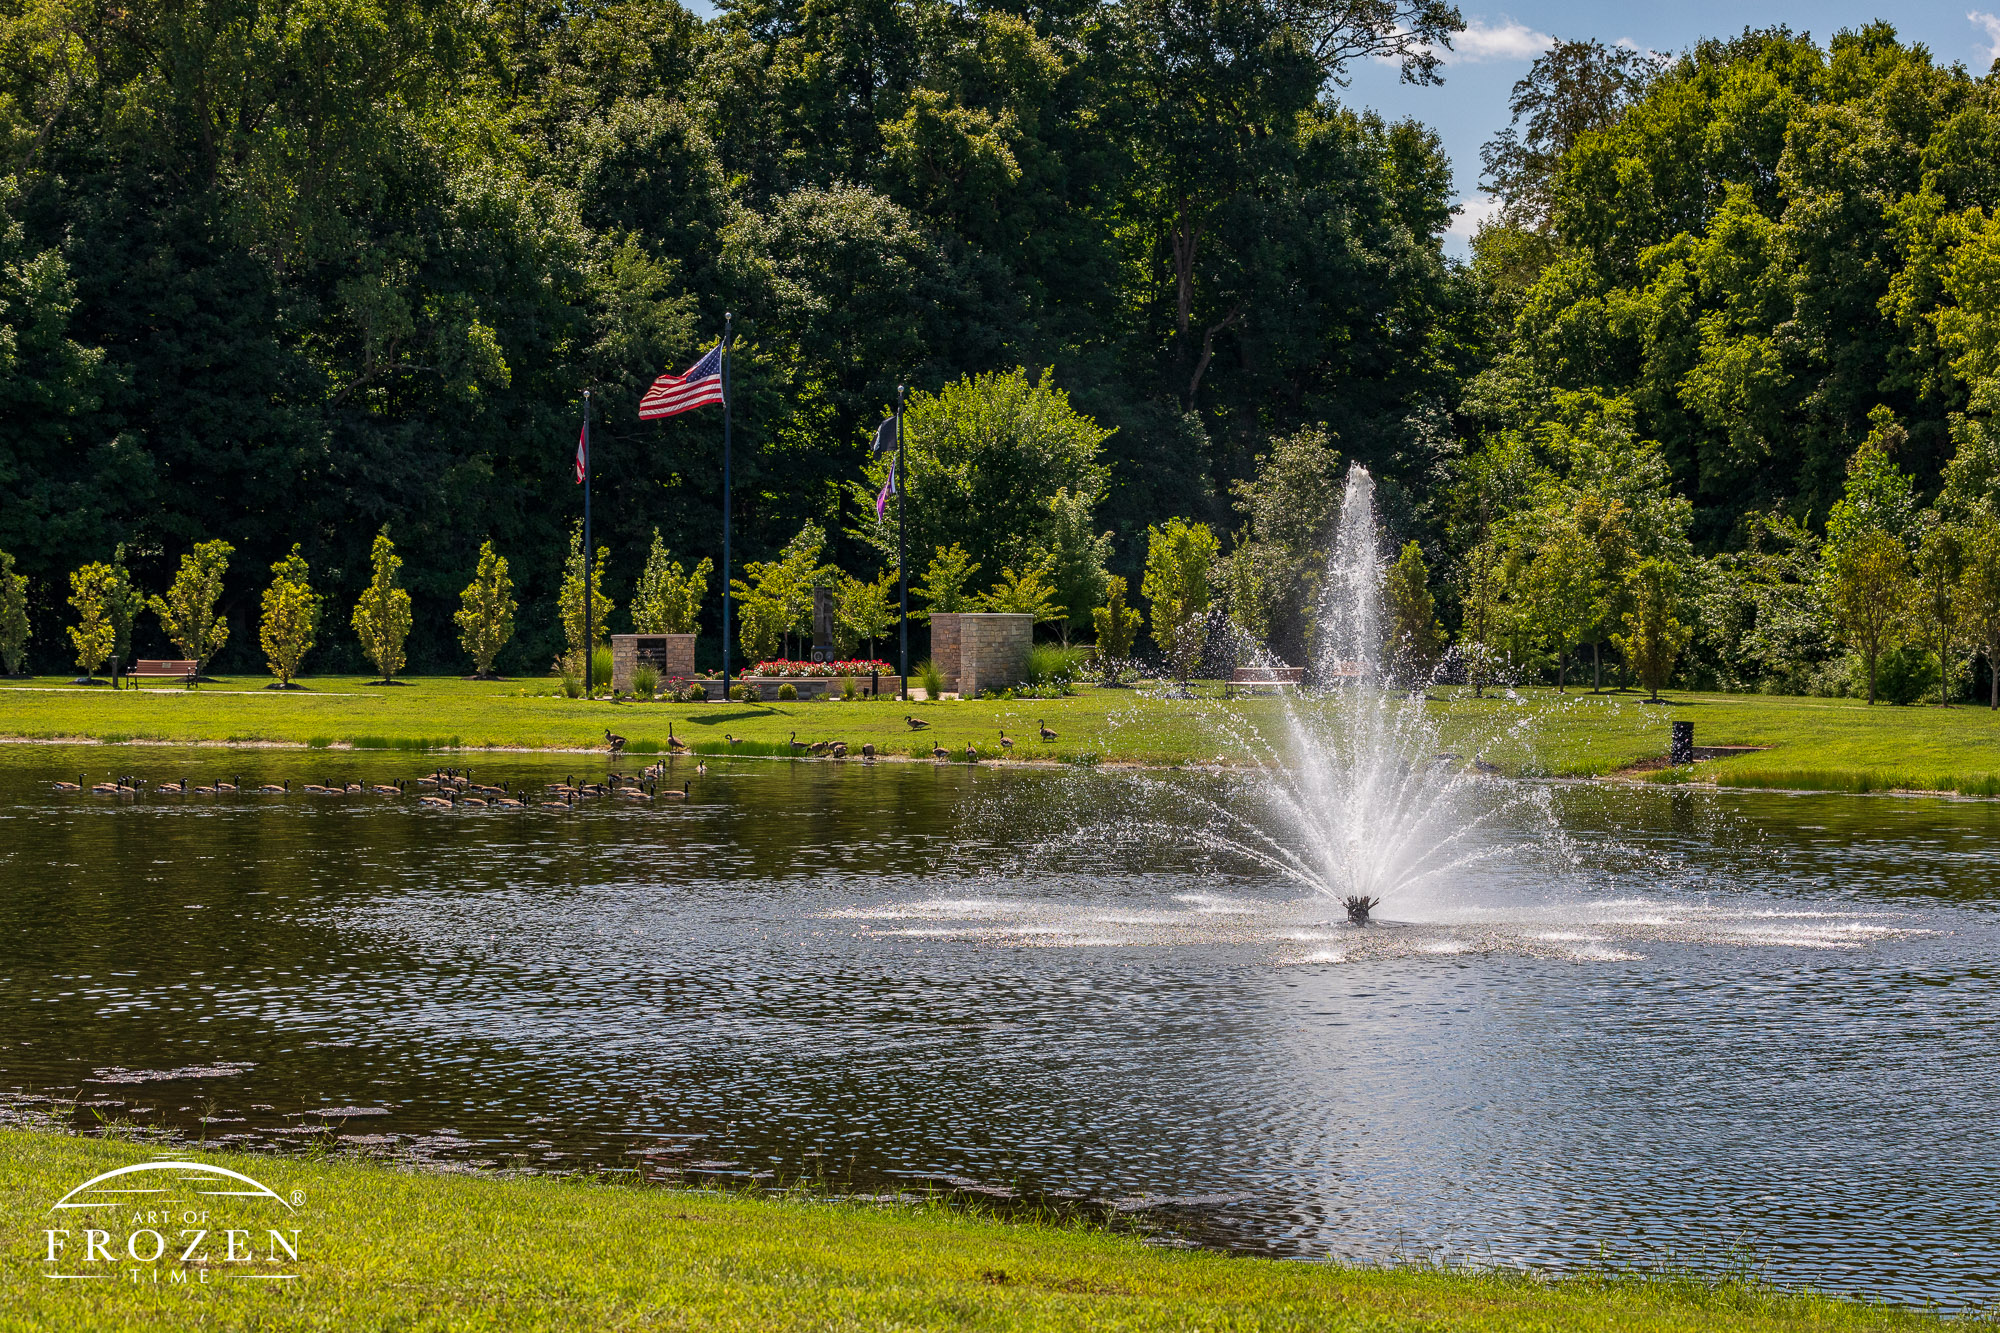 A view of the Gardner Park walking path which traverse the large pond featuring a fountain as the pathway meanders through trees and open space.